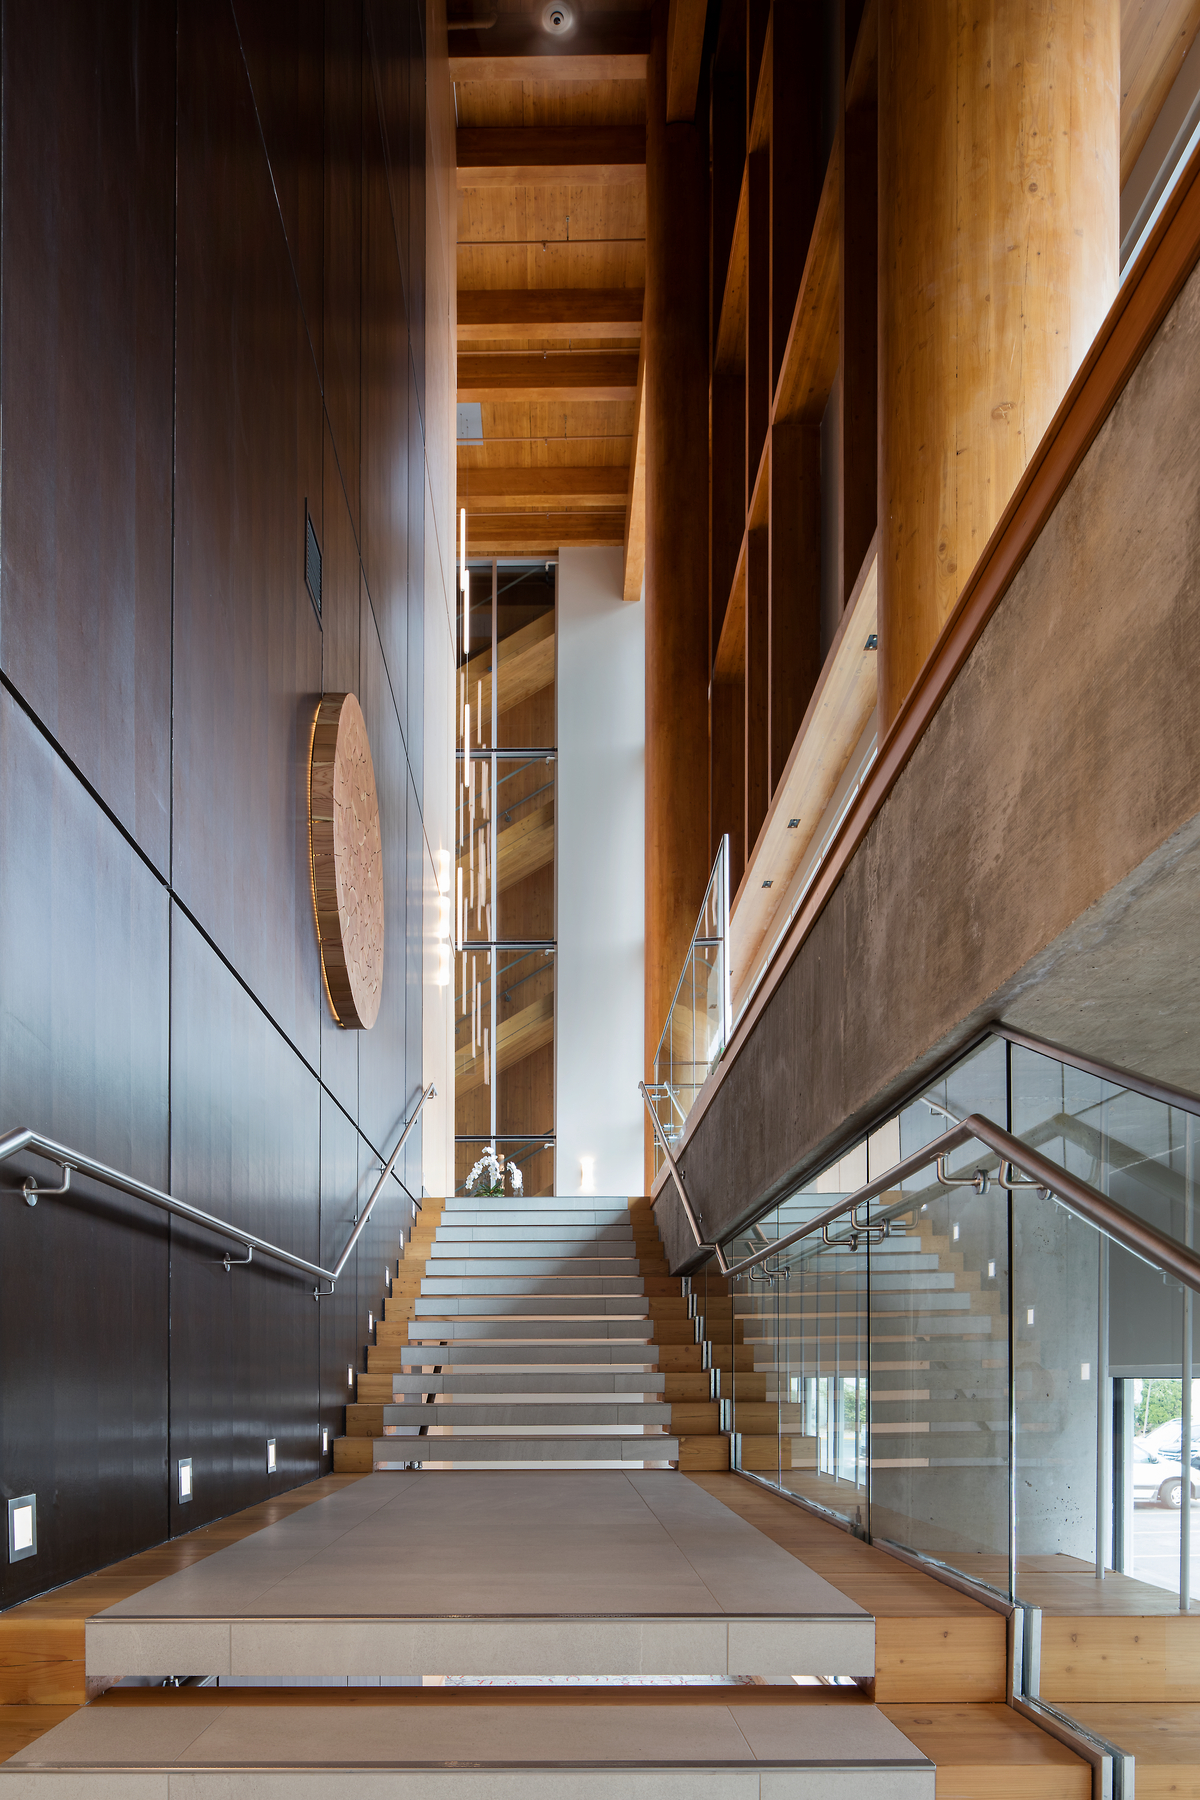 Interior main stairwell view of The West Wing, Penticton Lakeside Resort and Conference Centre highlighting wood timber stairs, and extensive use of exposed glue-laminated timber (glulam) and cross-laminated timber (CLT)